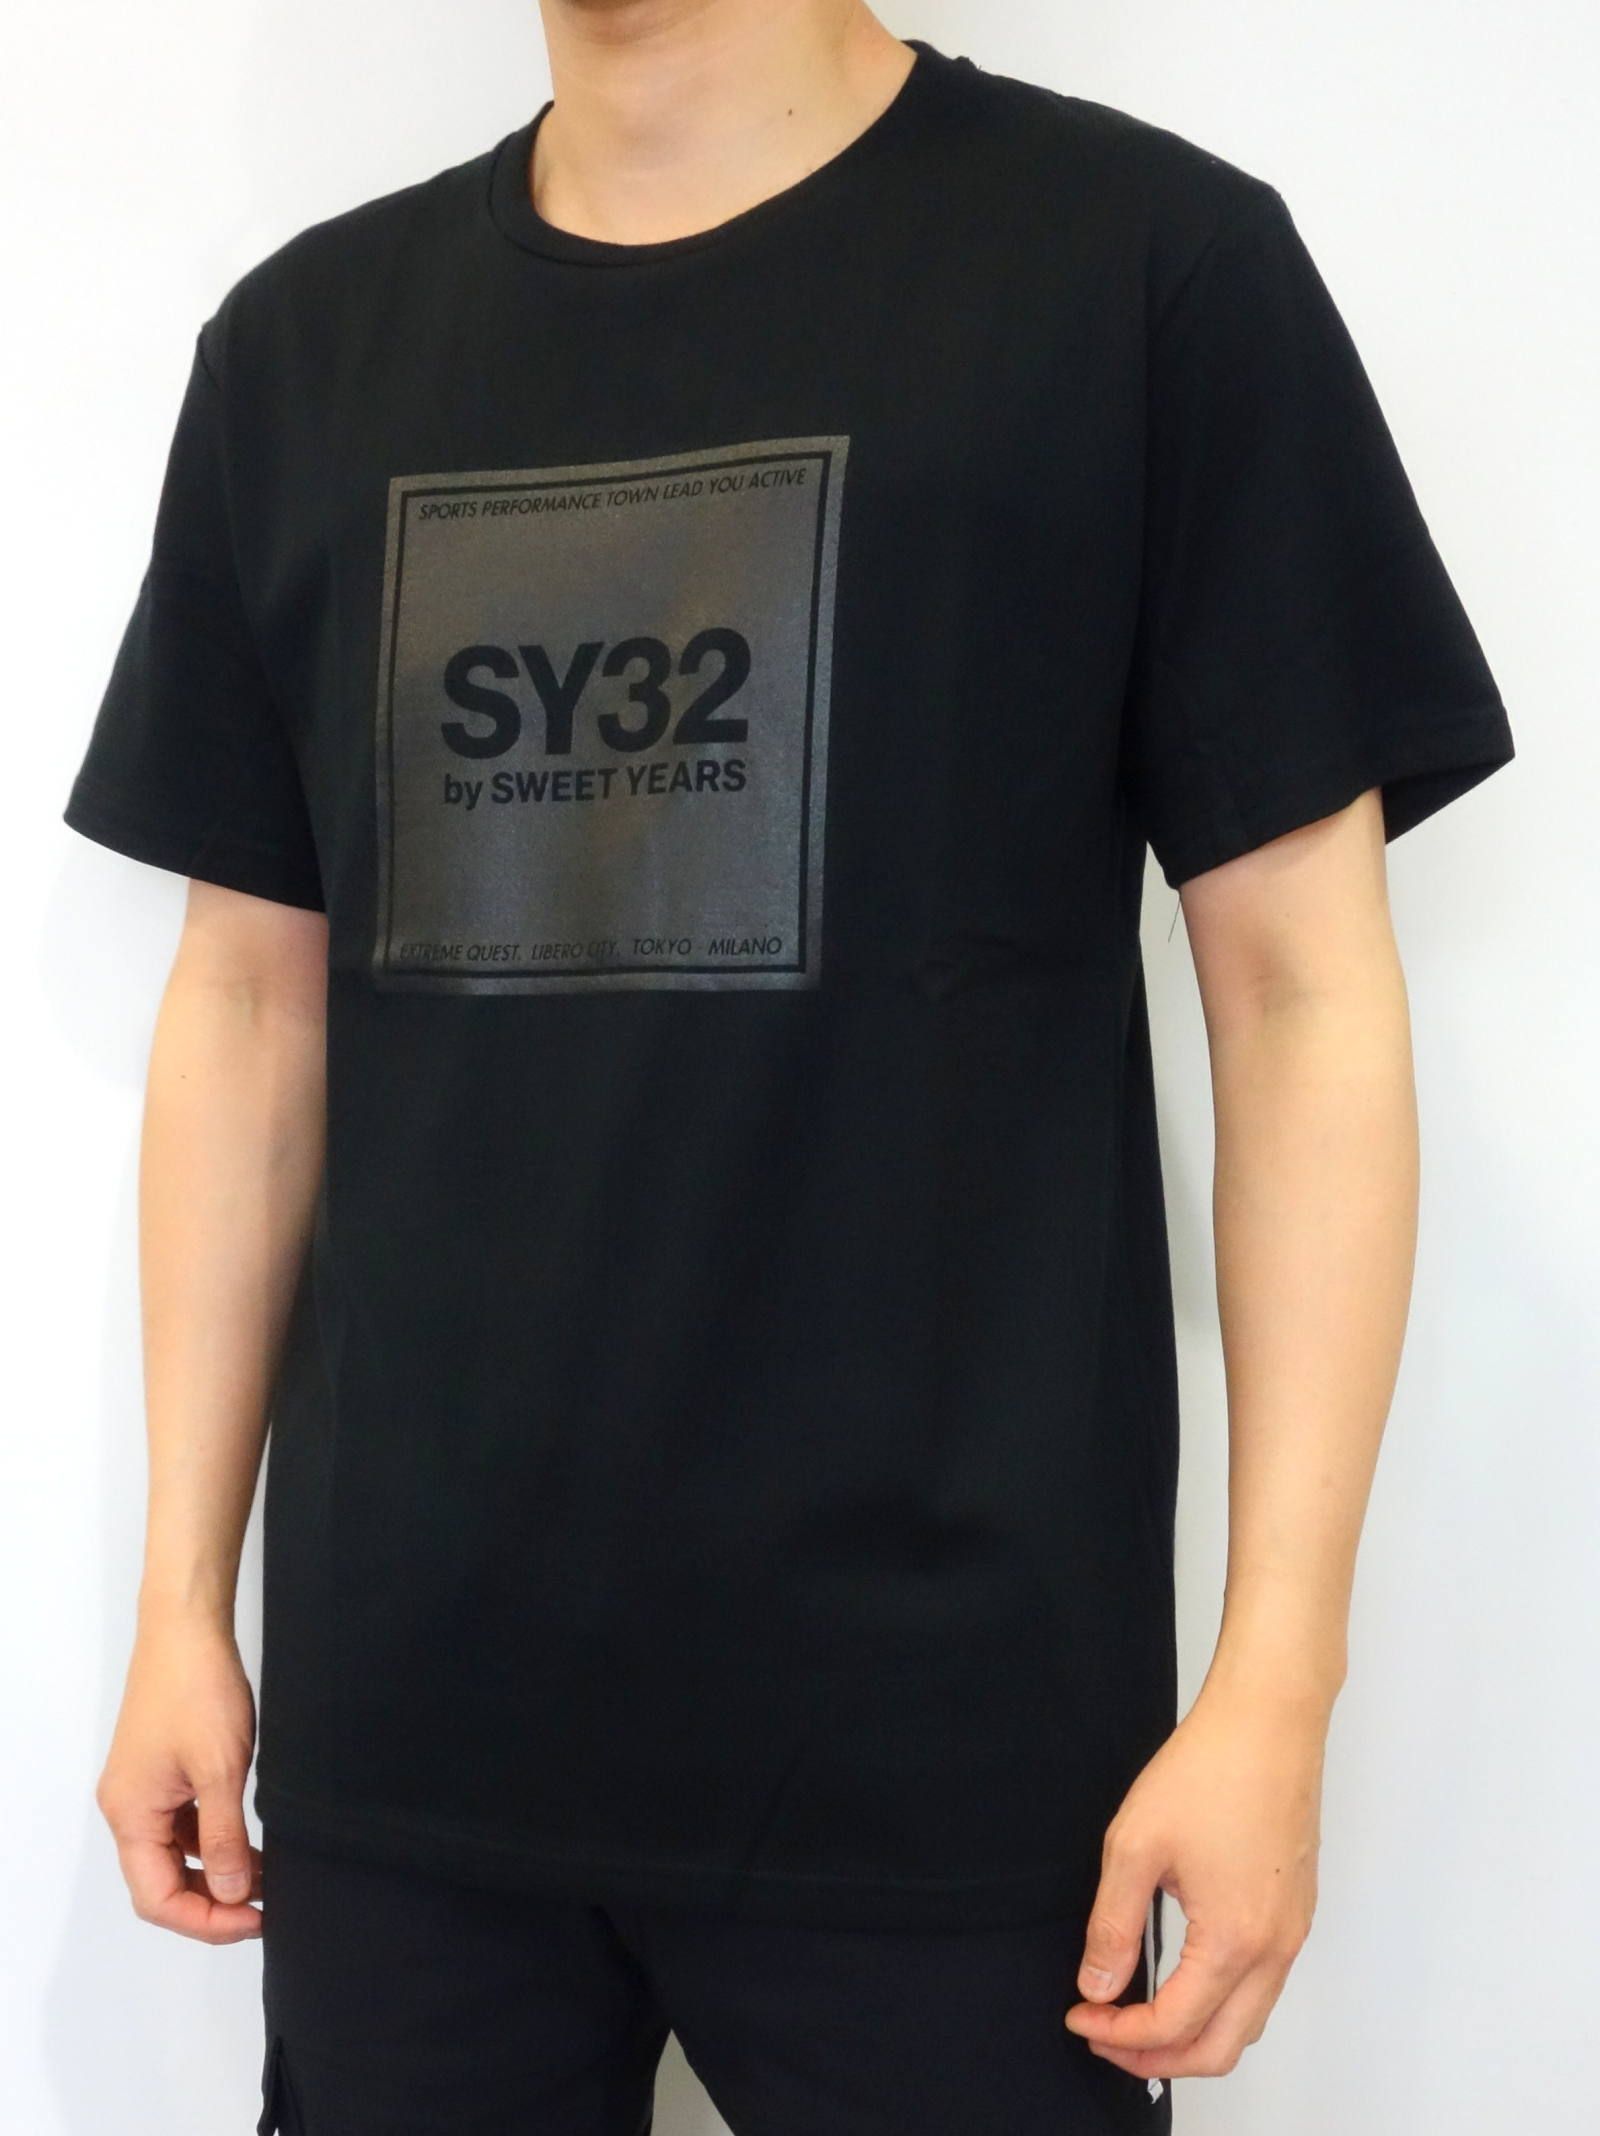 SY32 by SWEET YEARS - SQUARE LOGO TEE / 10027J / プリントTシャツ